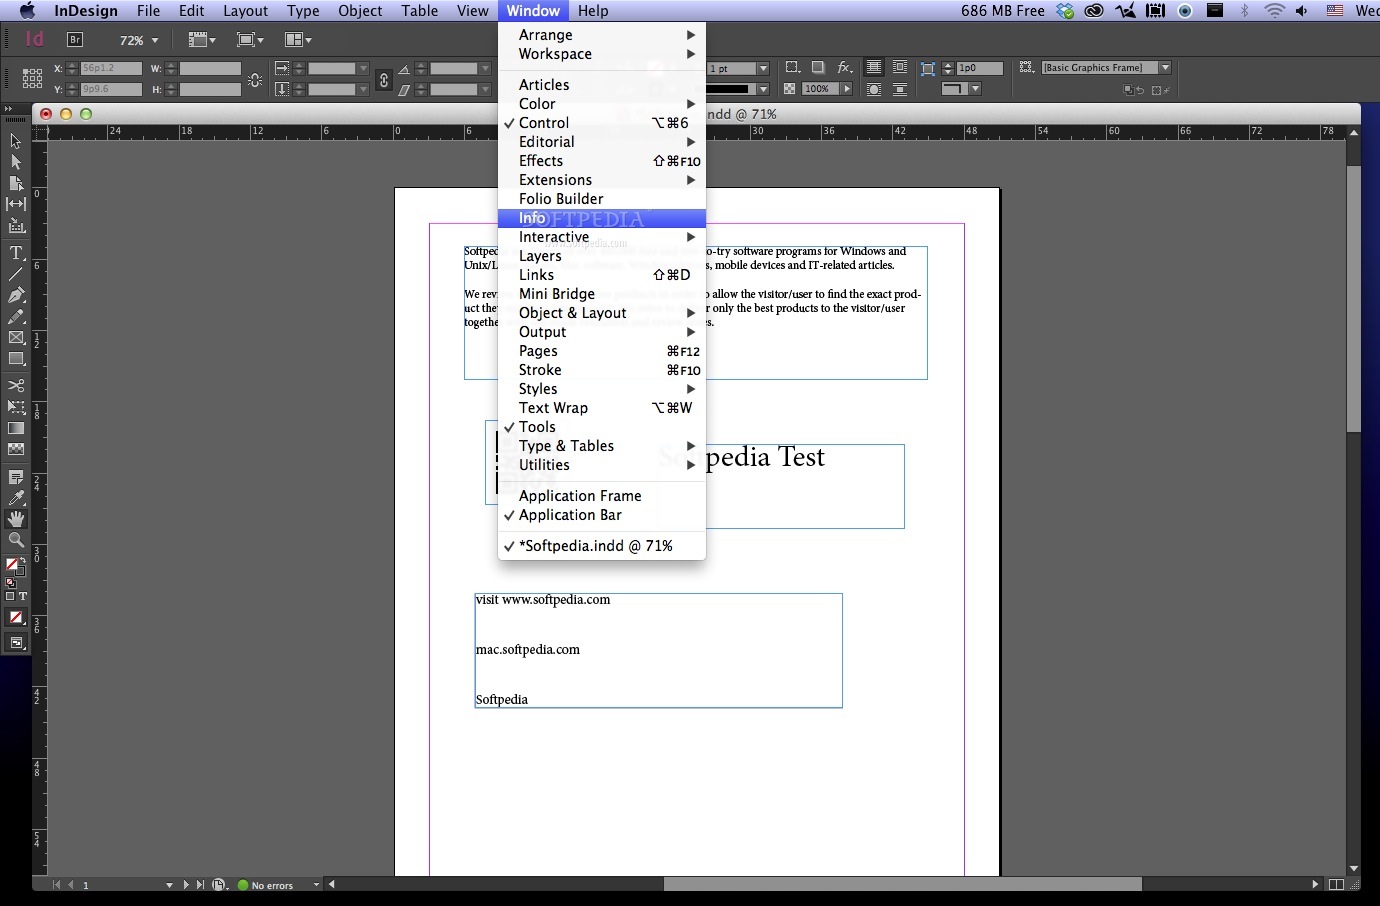 How to get adobe indesign full version free